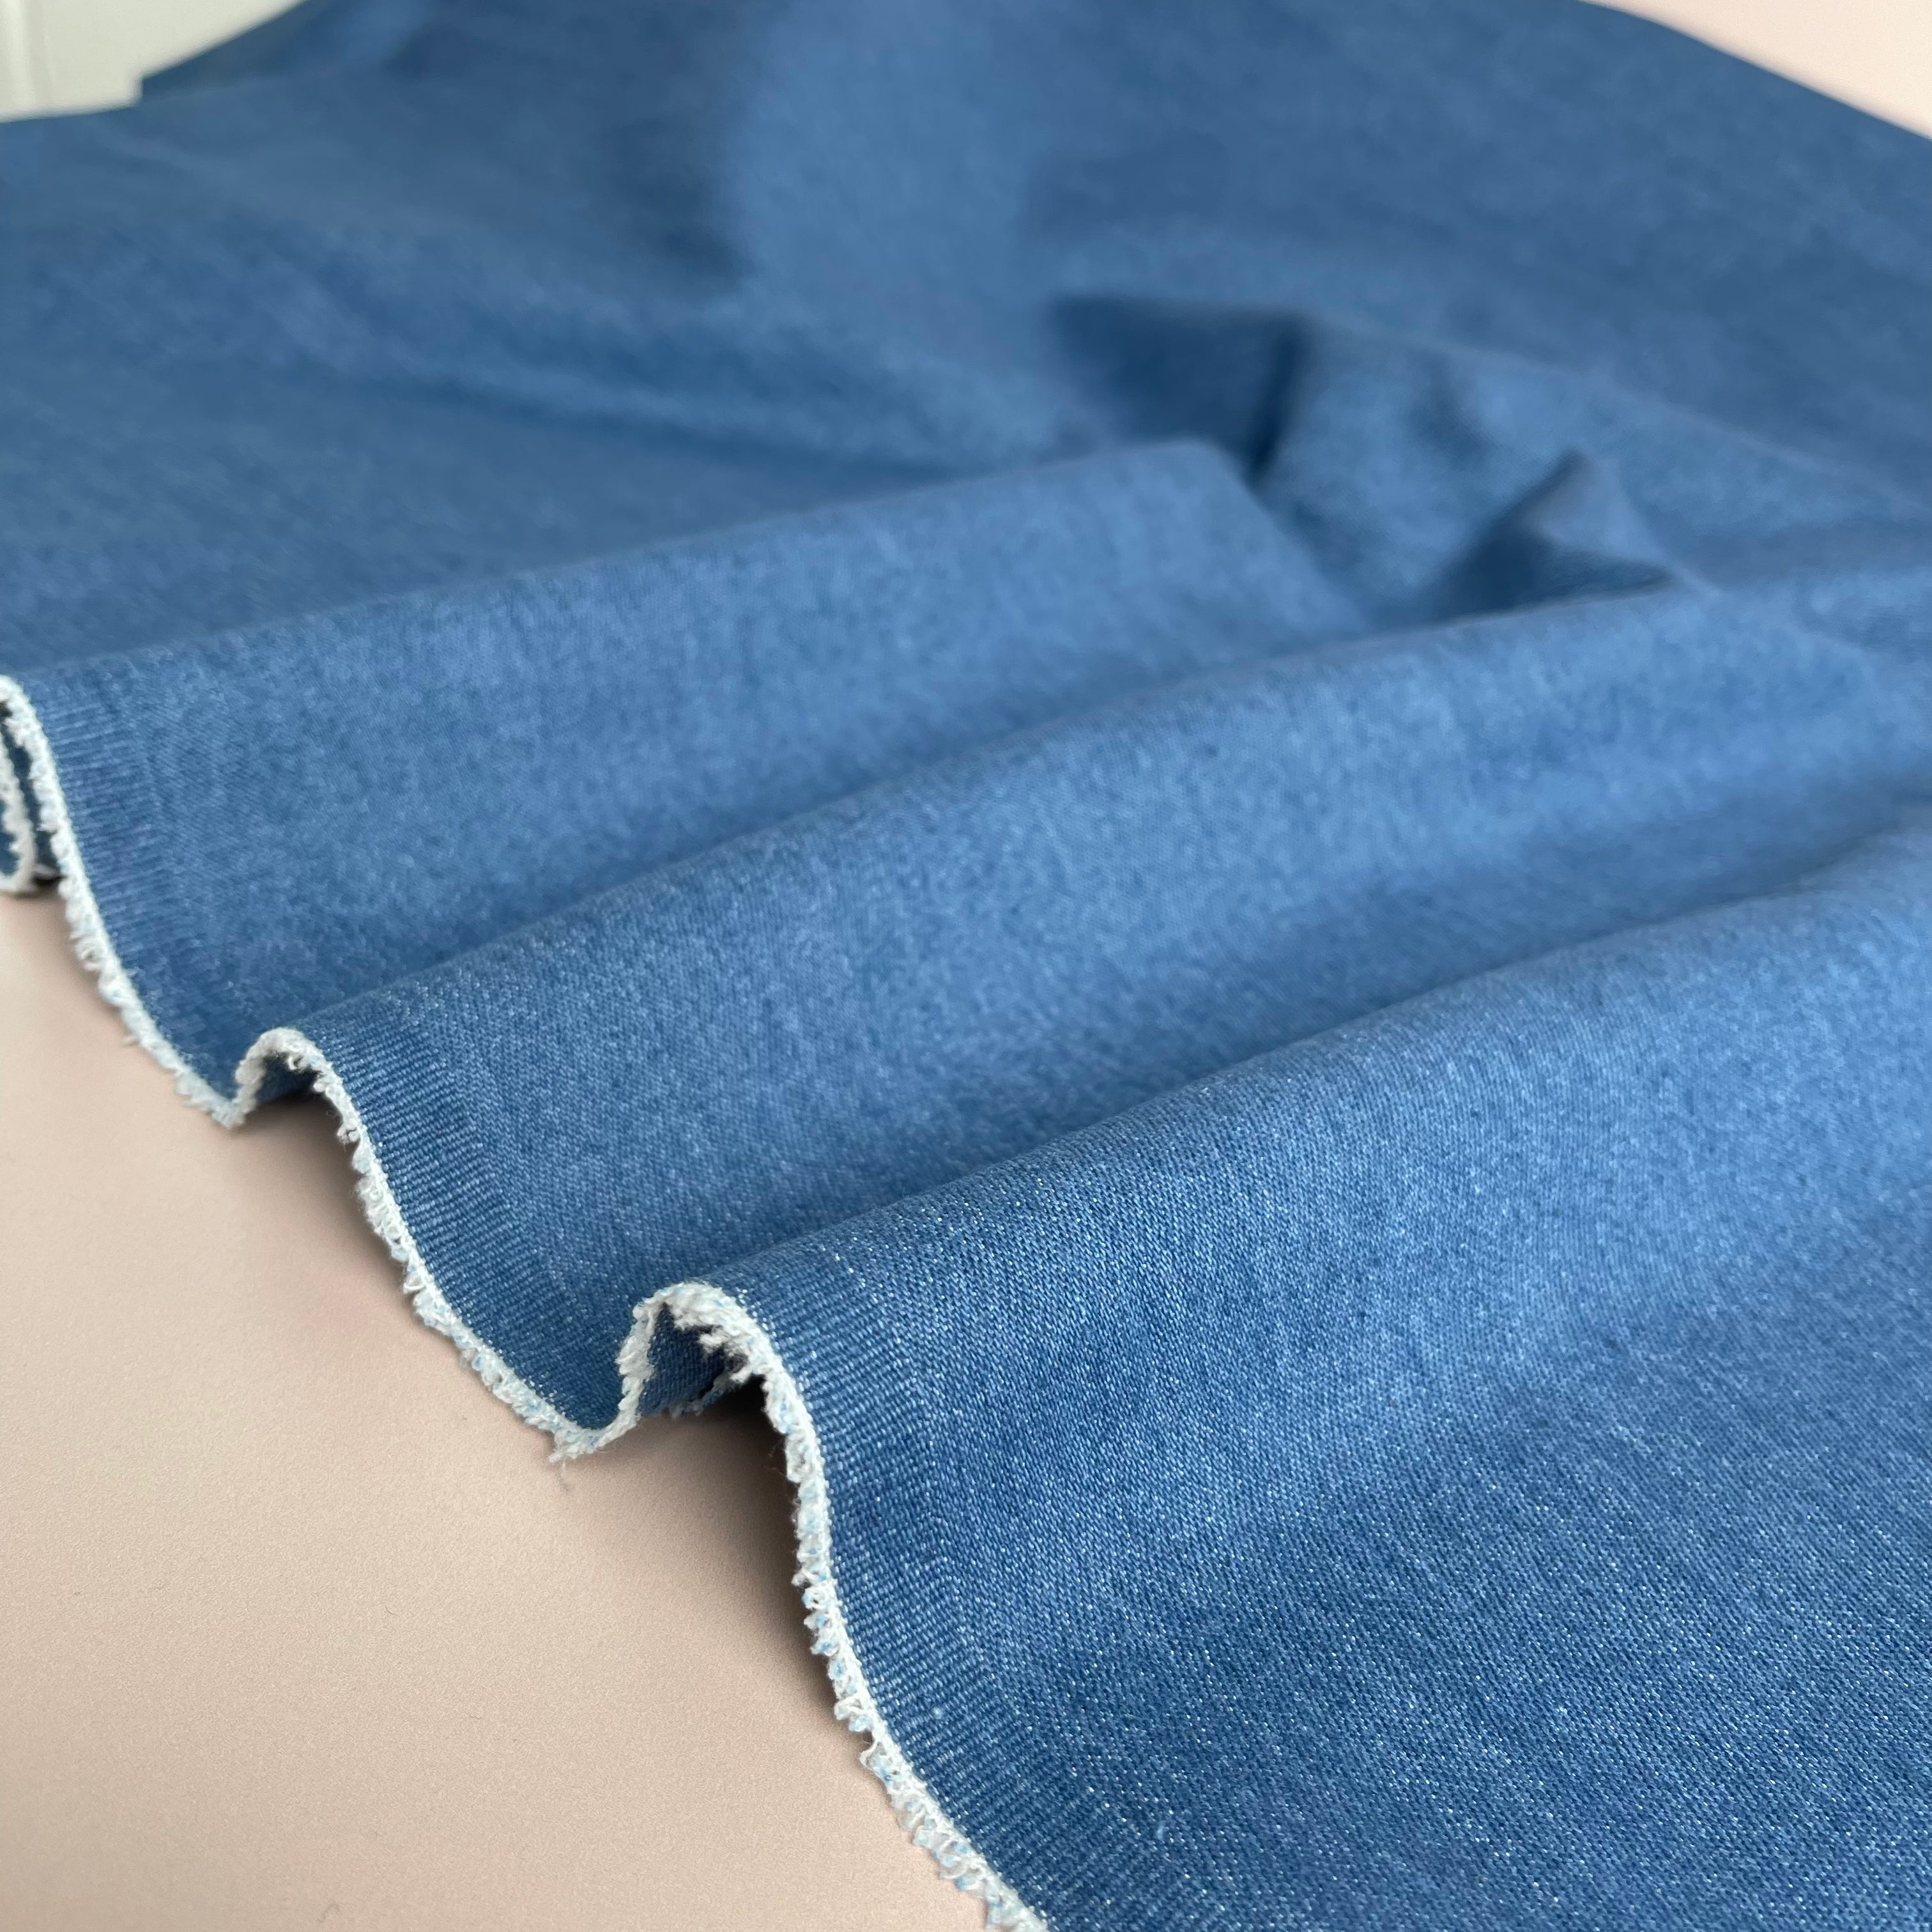 REMNANT 2.04 Metres - 9oz Recycled Cotton Stretch Denim in Blue